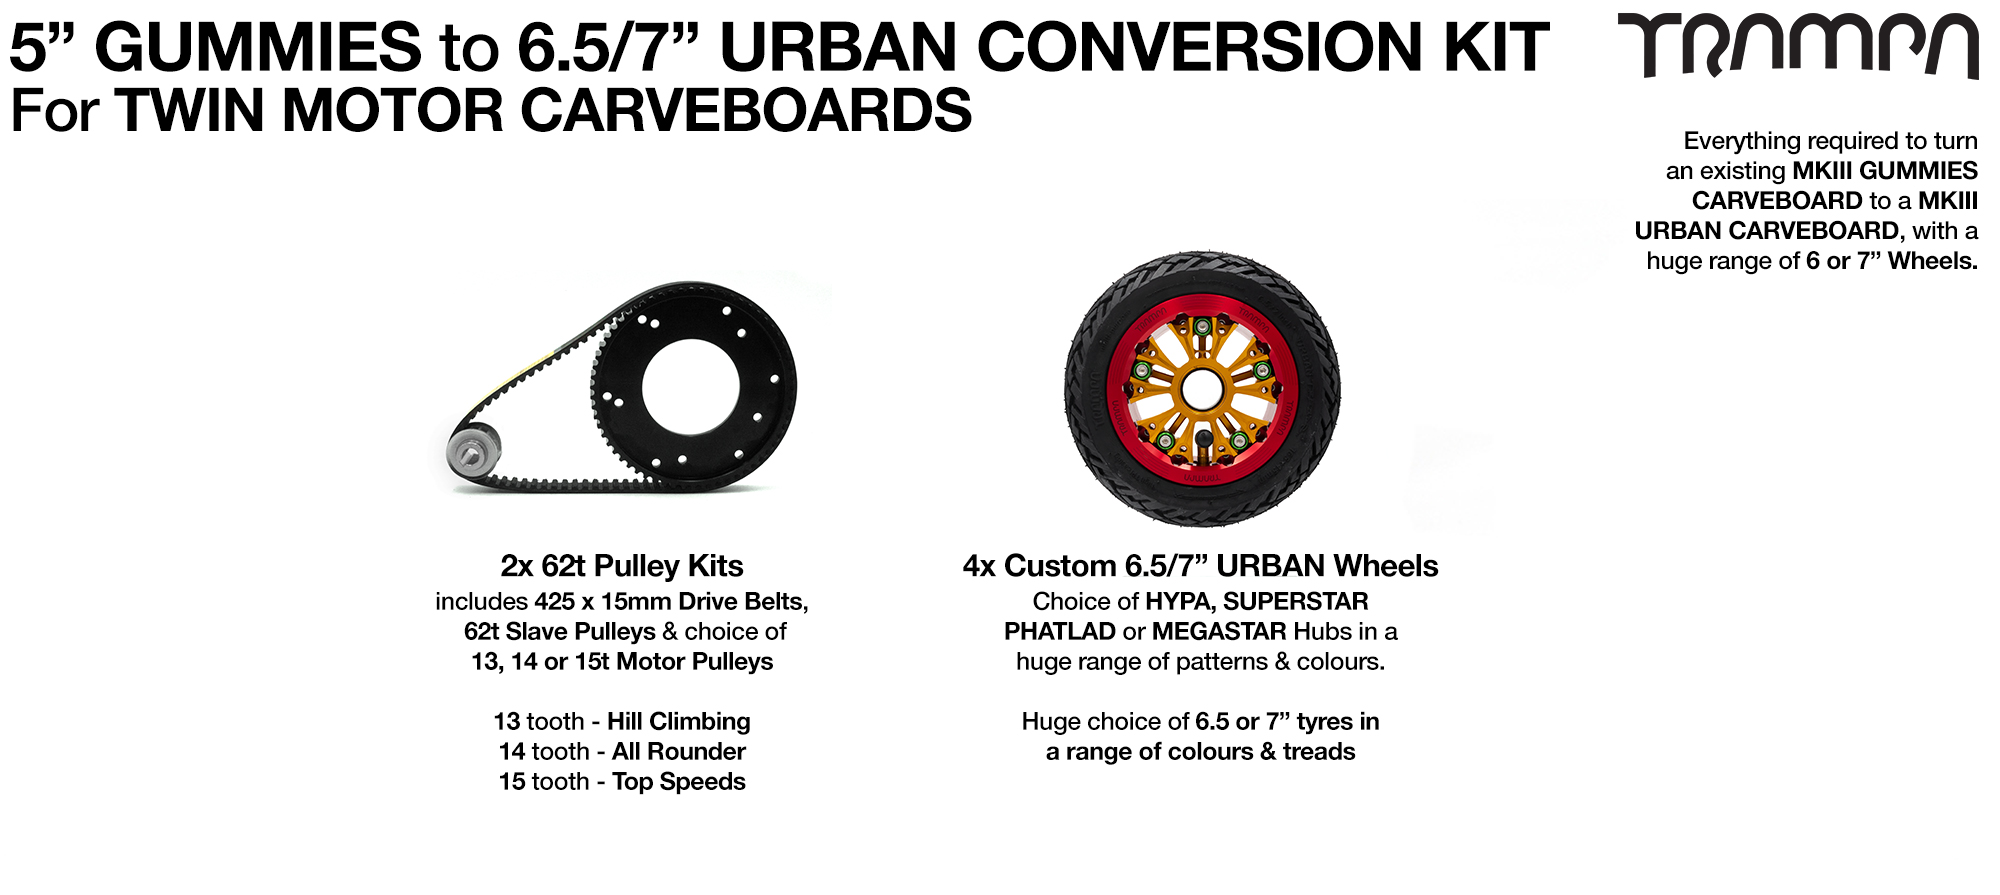 Gummies to Urban Carveboard complete Conversion kit with 4x Custom wheels for TWIN Motor Mounts 